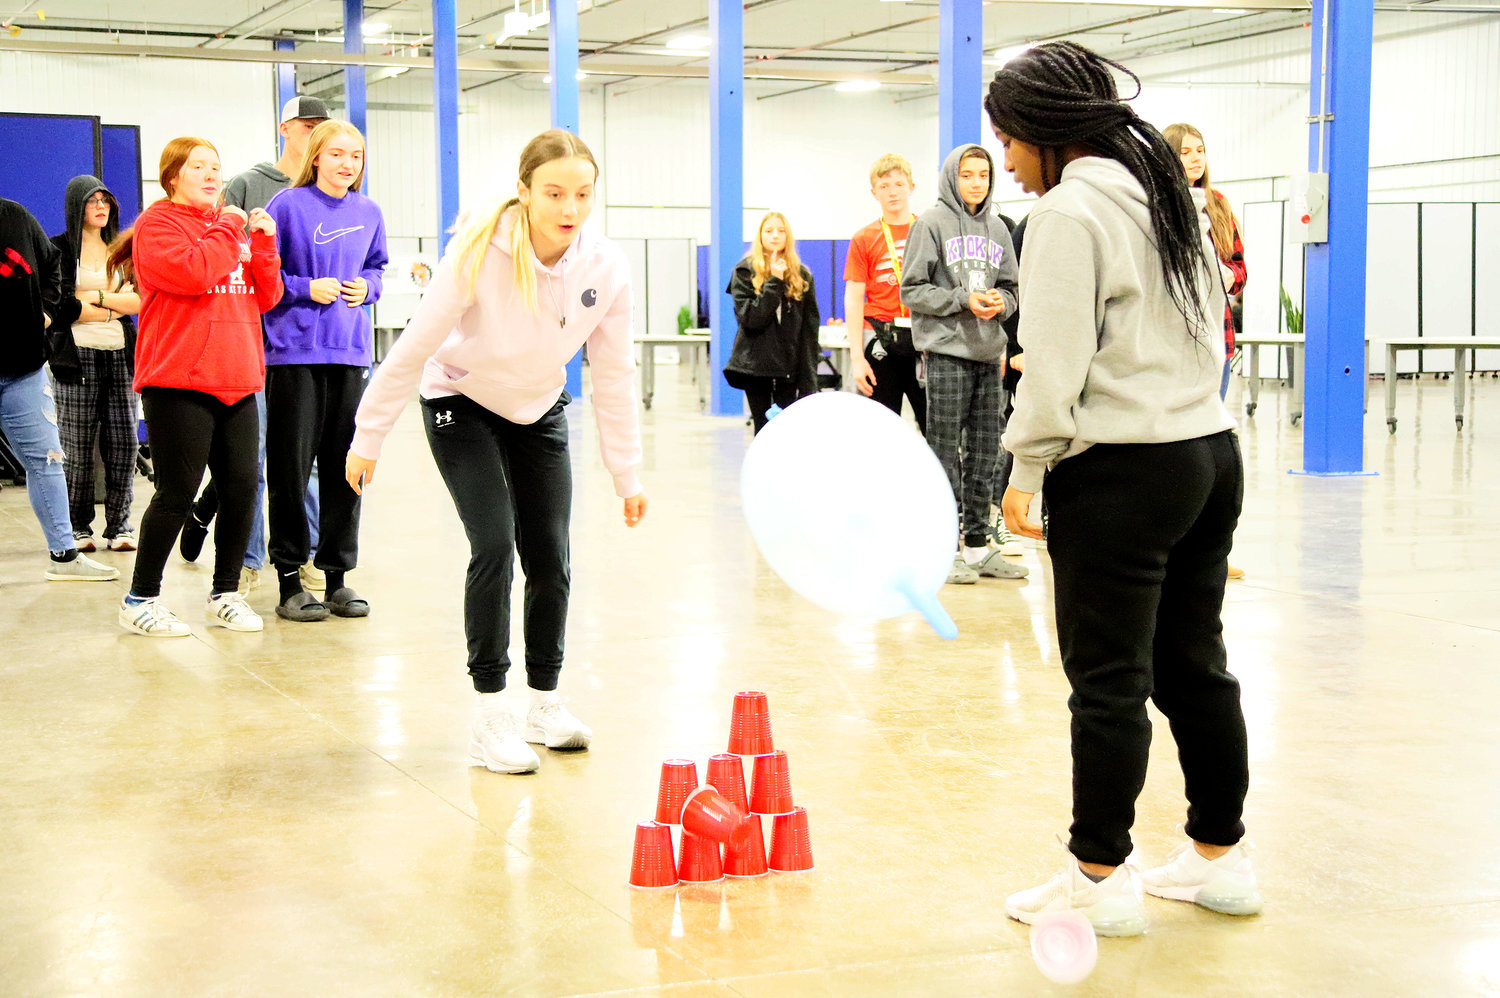 Students compete in a balloon relay as part of SCC's program at the Lee County Career Advantage Center Tuesday afternoon.